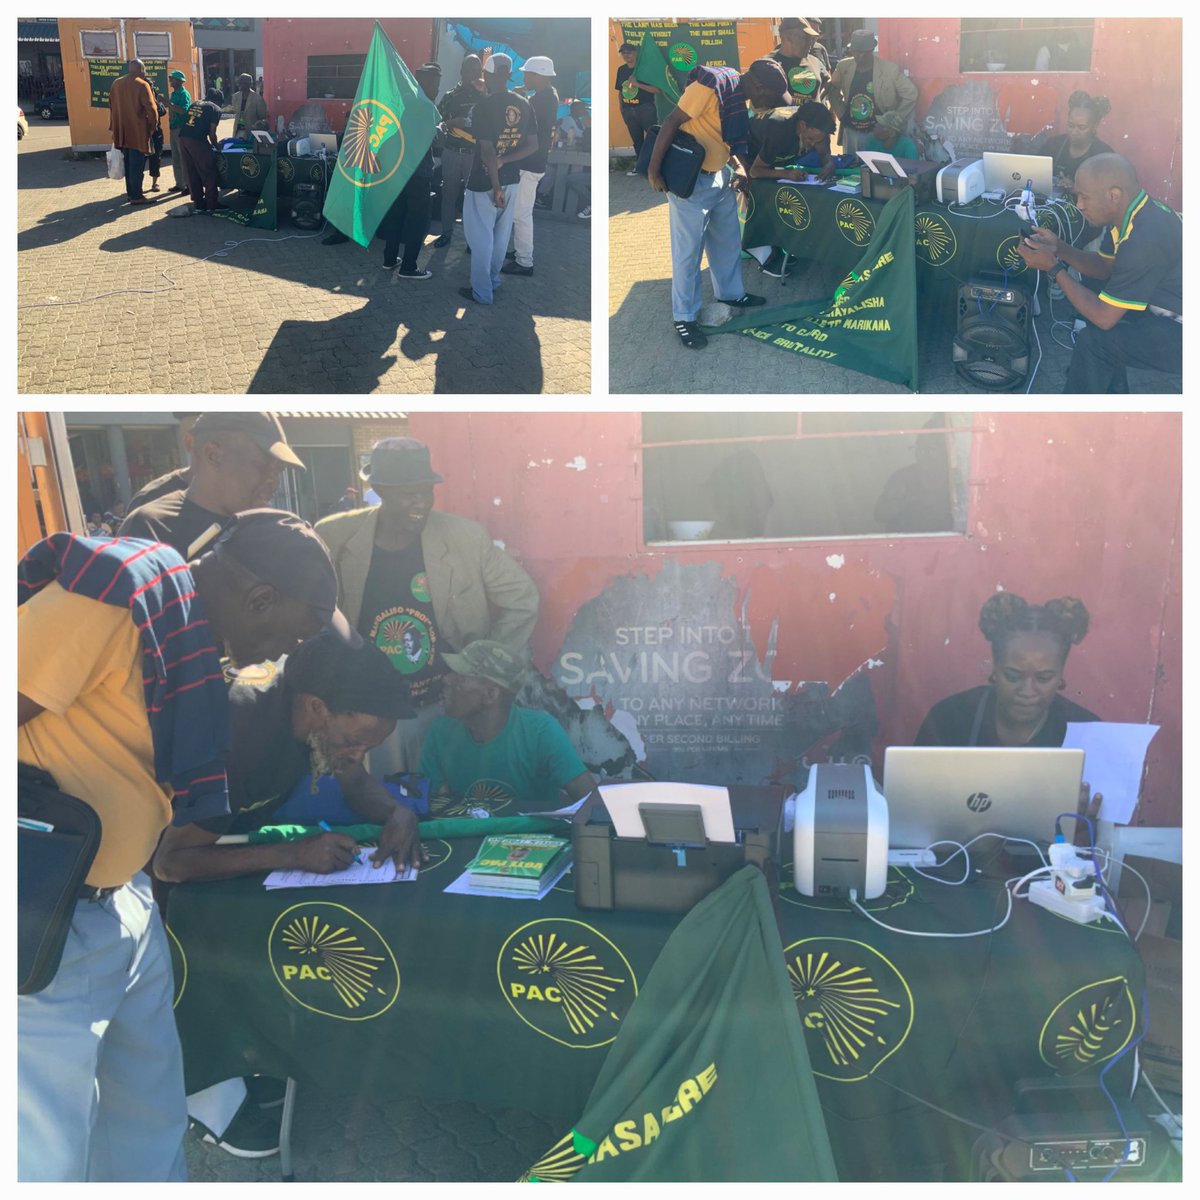 Join us in Klerksdorp as we blaze the trail for a united Africa! The PAC is issuing membership cards on the spot, welcoming new members into our movement for true liberation. Together, we'll build a brighter future for all Africans. #PAC #VotePAC #Elections2024